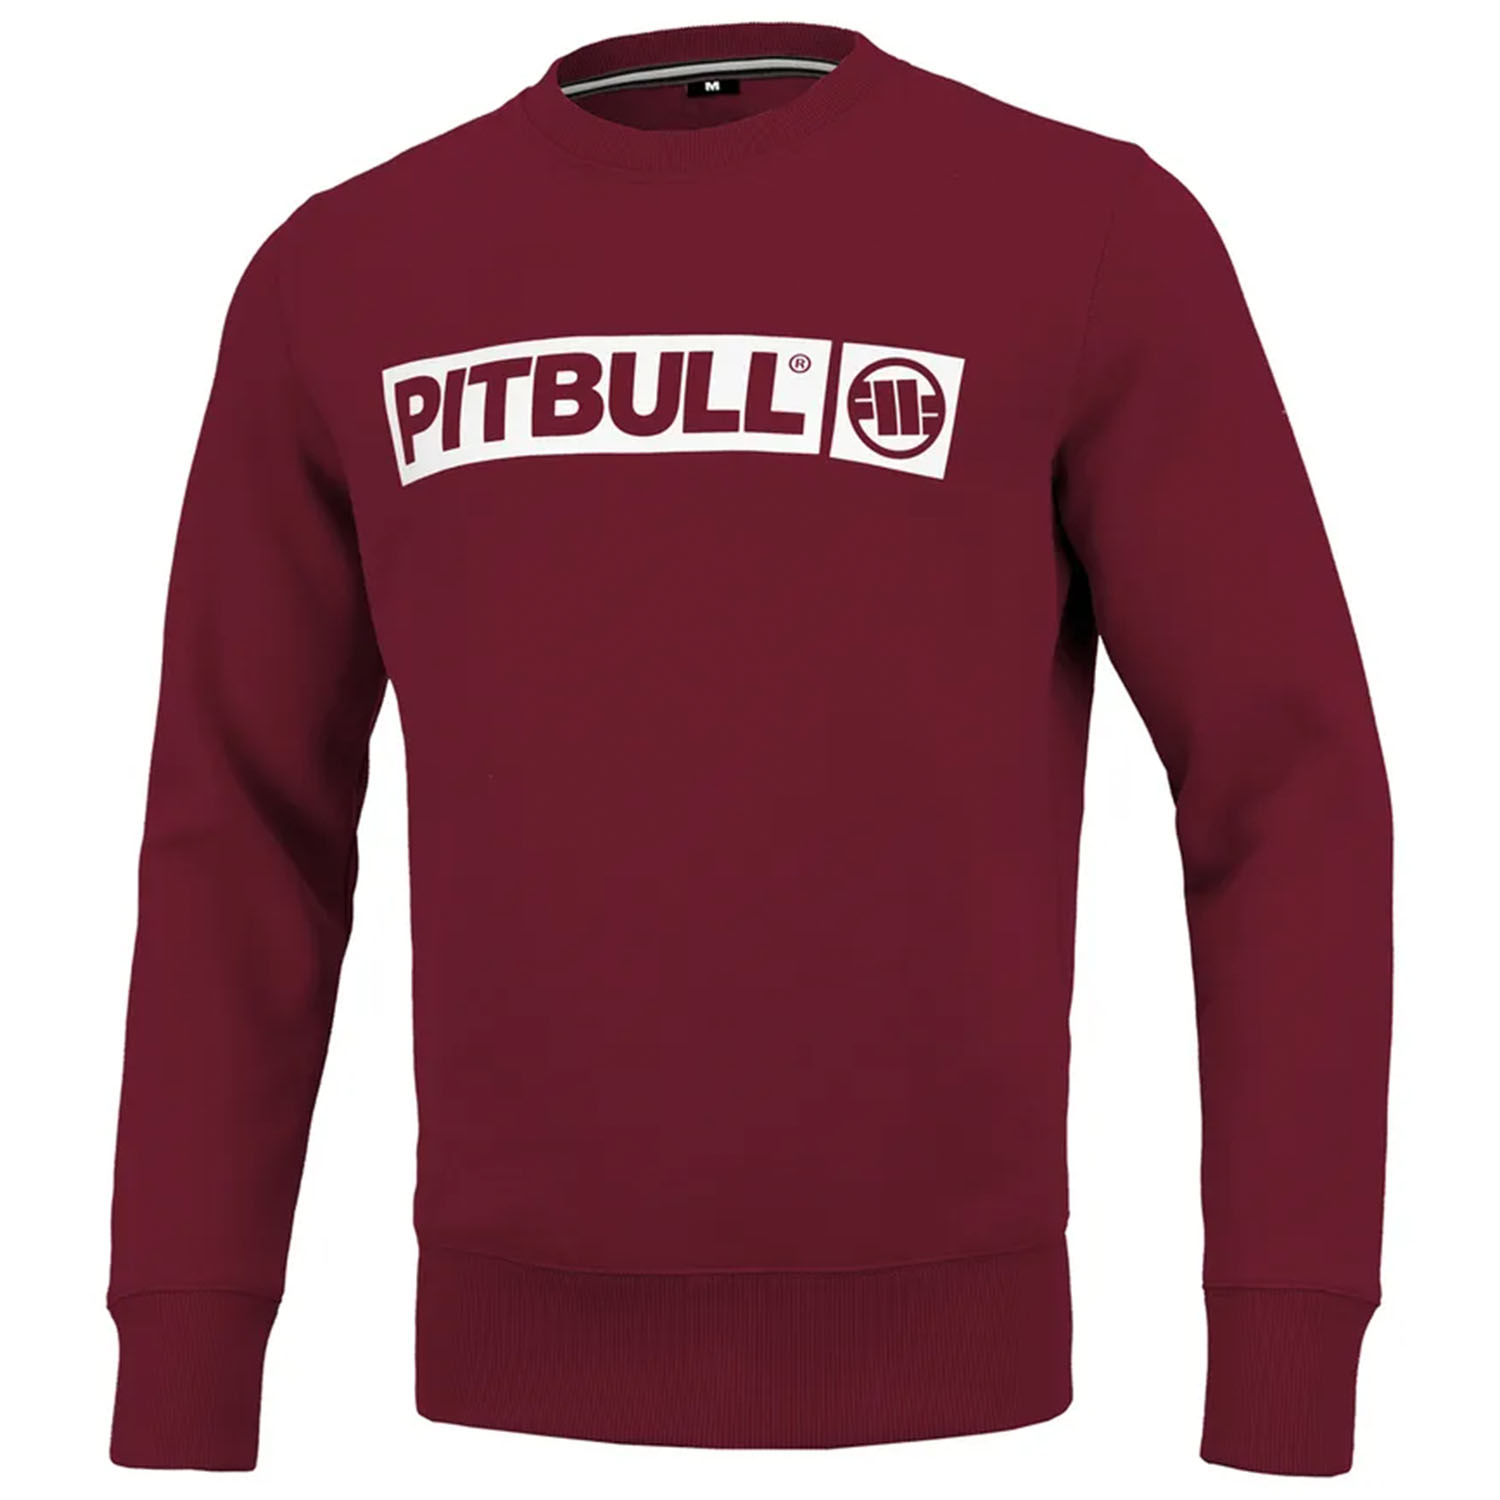 Pit Bull West Coast Pullover, Terry Hilltop, wine red, M